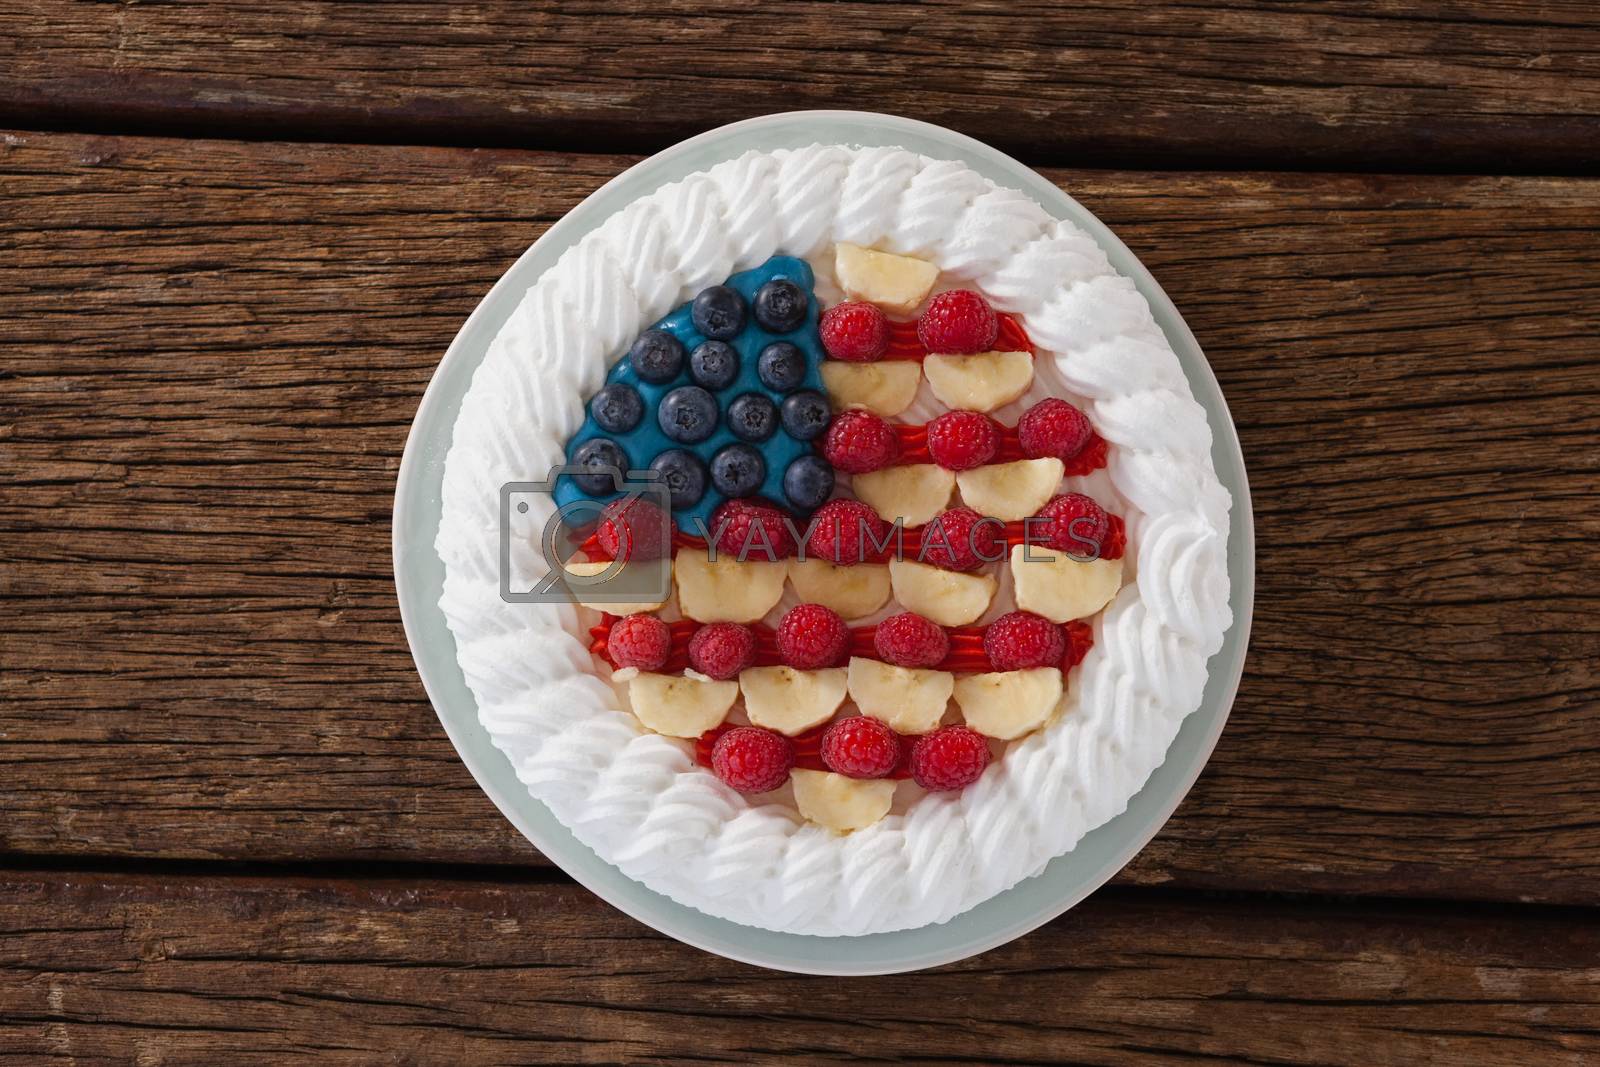 Royalty free image of Fruitcake with 4th july theme by Wavebreakmedia